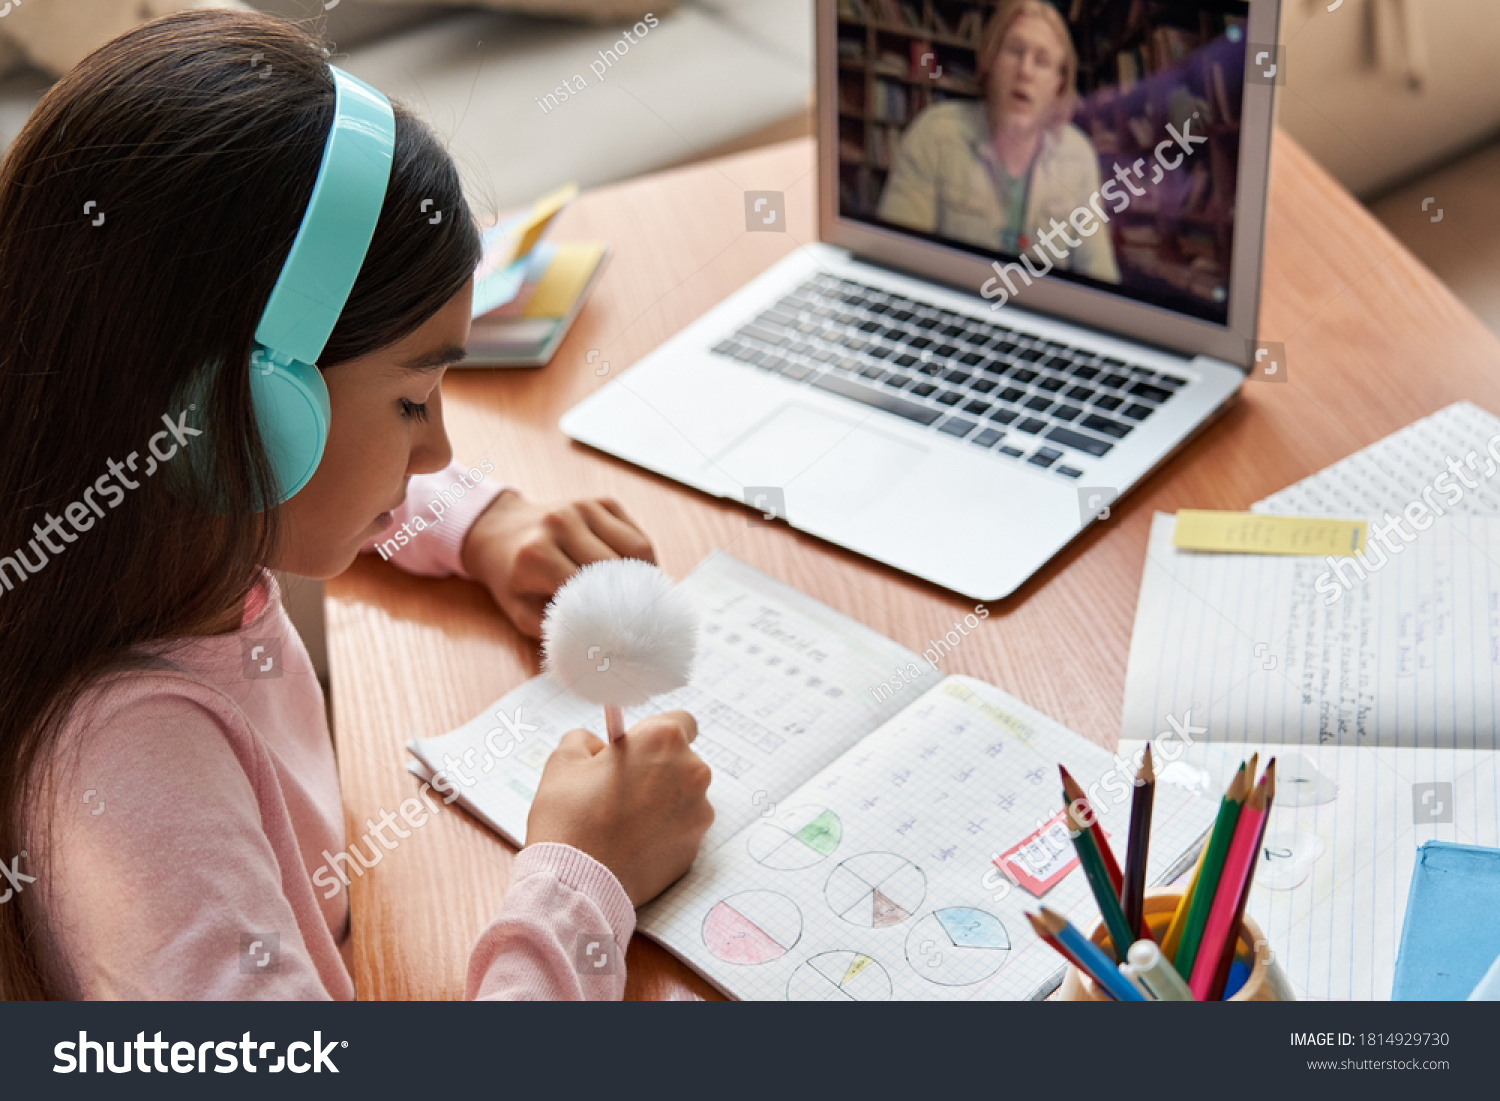 Indian latin preteen girl school pupil wearing headphones distance learning online at virtual lesson with math teacher tutor on laptop screen by video conference call at home. Over shoulder view. #1814929730